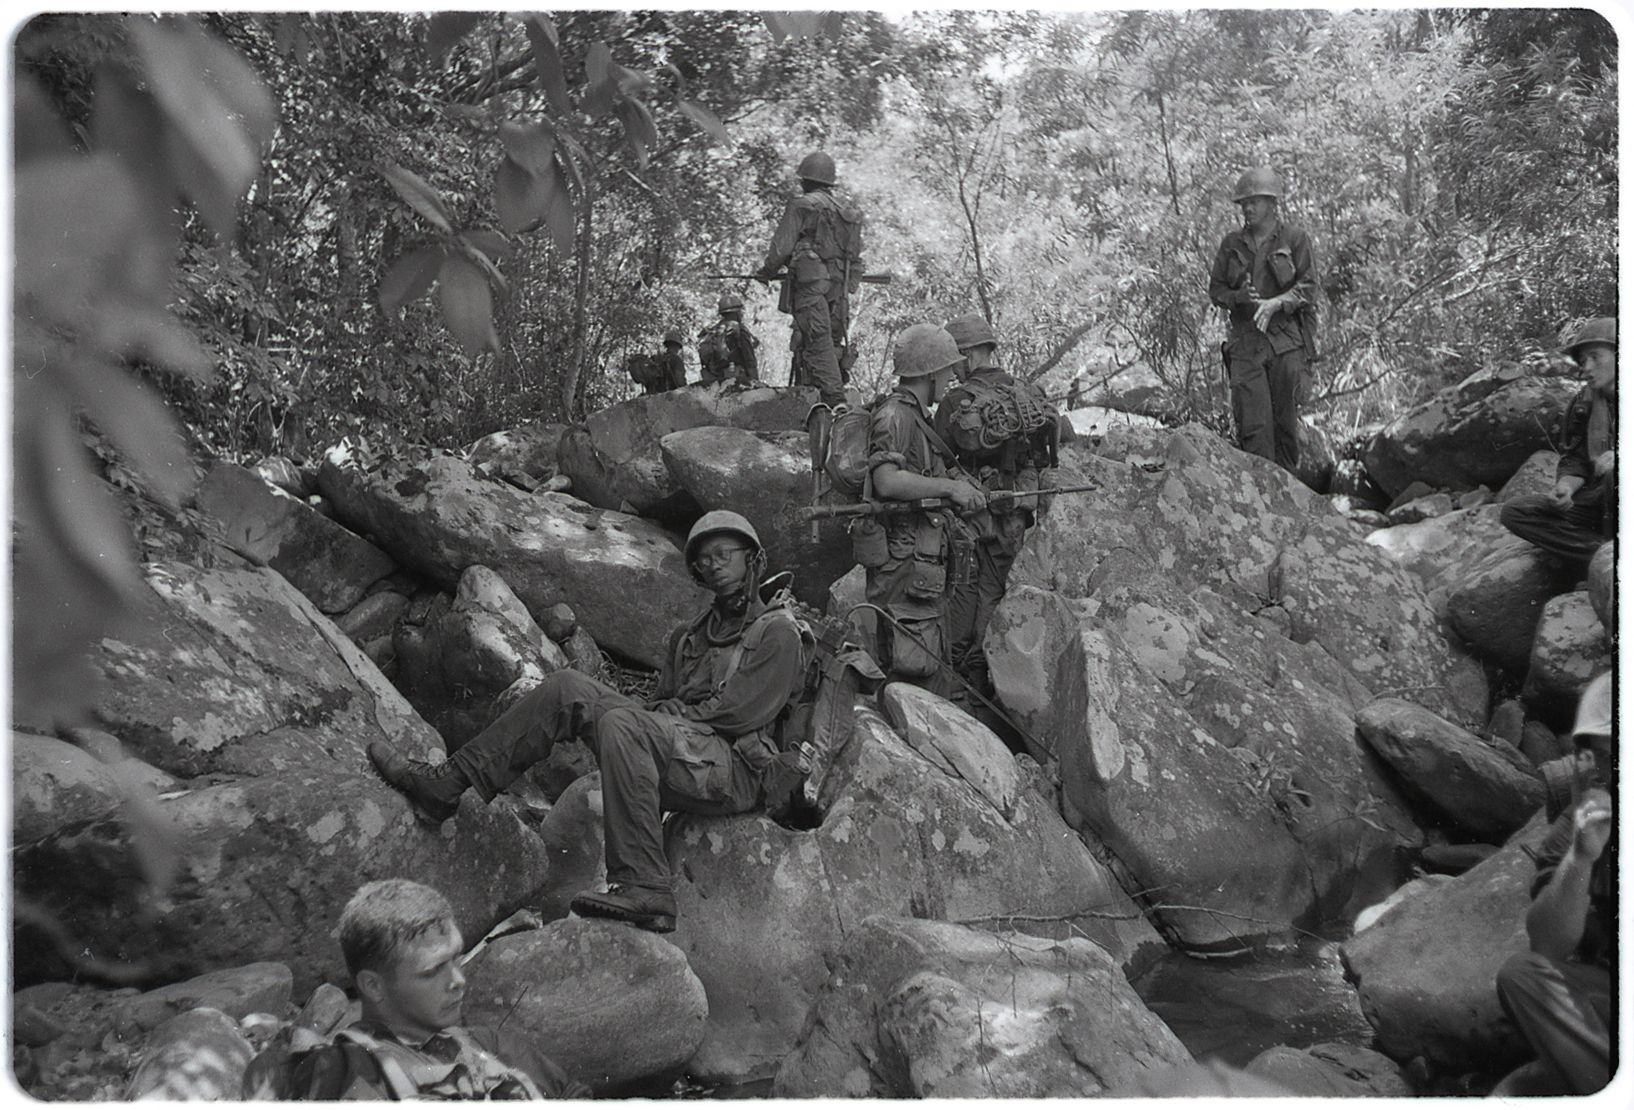 Marines of Company L, 3rd Battalion, 5th Marines, take a rest on rocky terrain near Dong Ha during Operation Hastings in Vietnam, July 1966. Marine Corps photo by Staff Sgt. R.E. Wilson